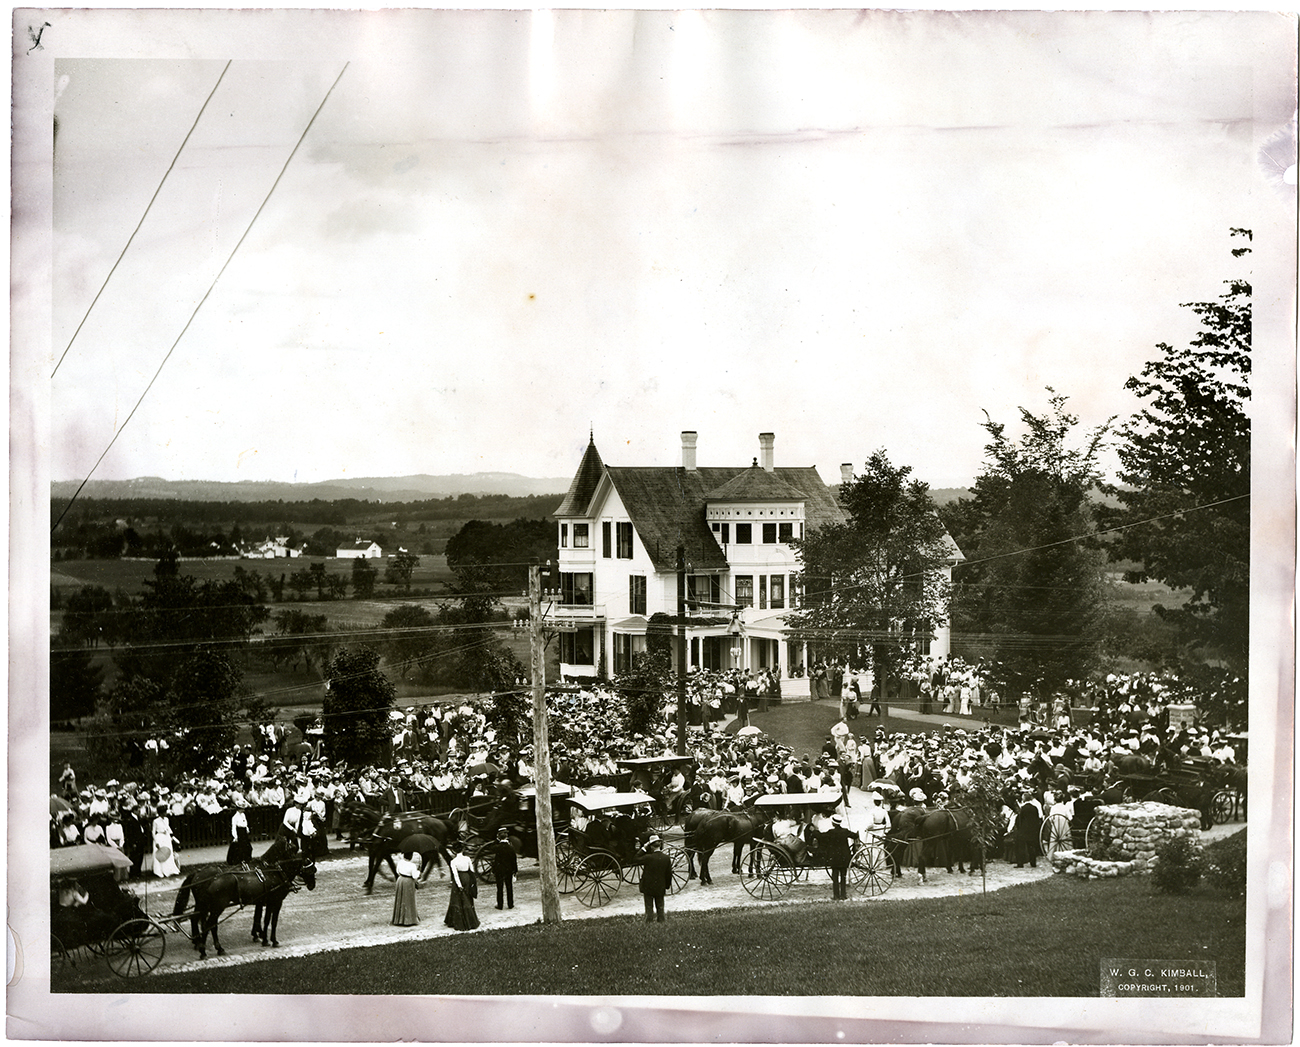 Rear view of Pleasant View, undated (P06789). Courtesy of The Mary Baker Eddy Collection